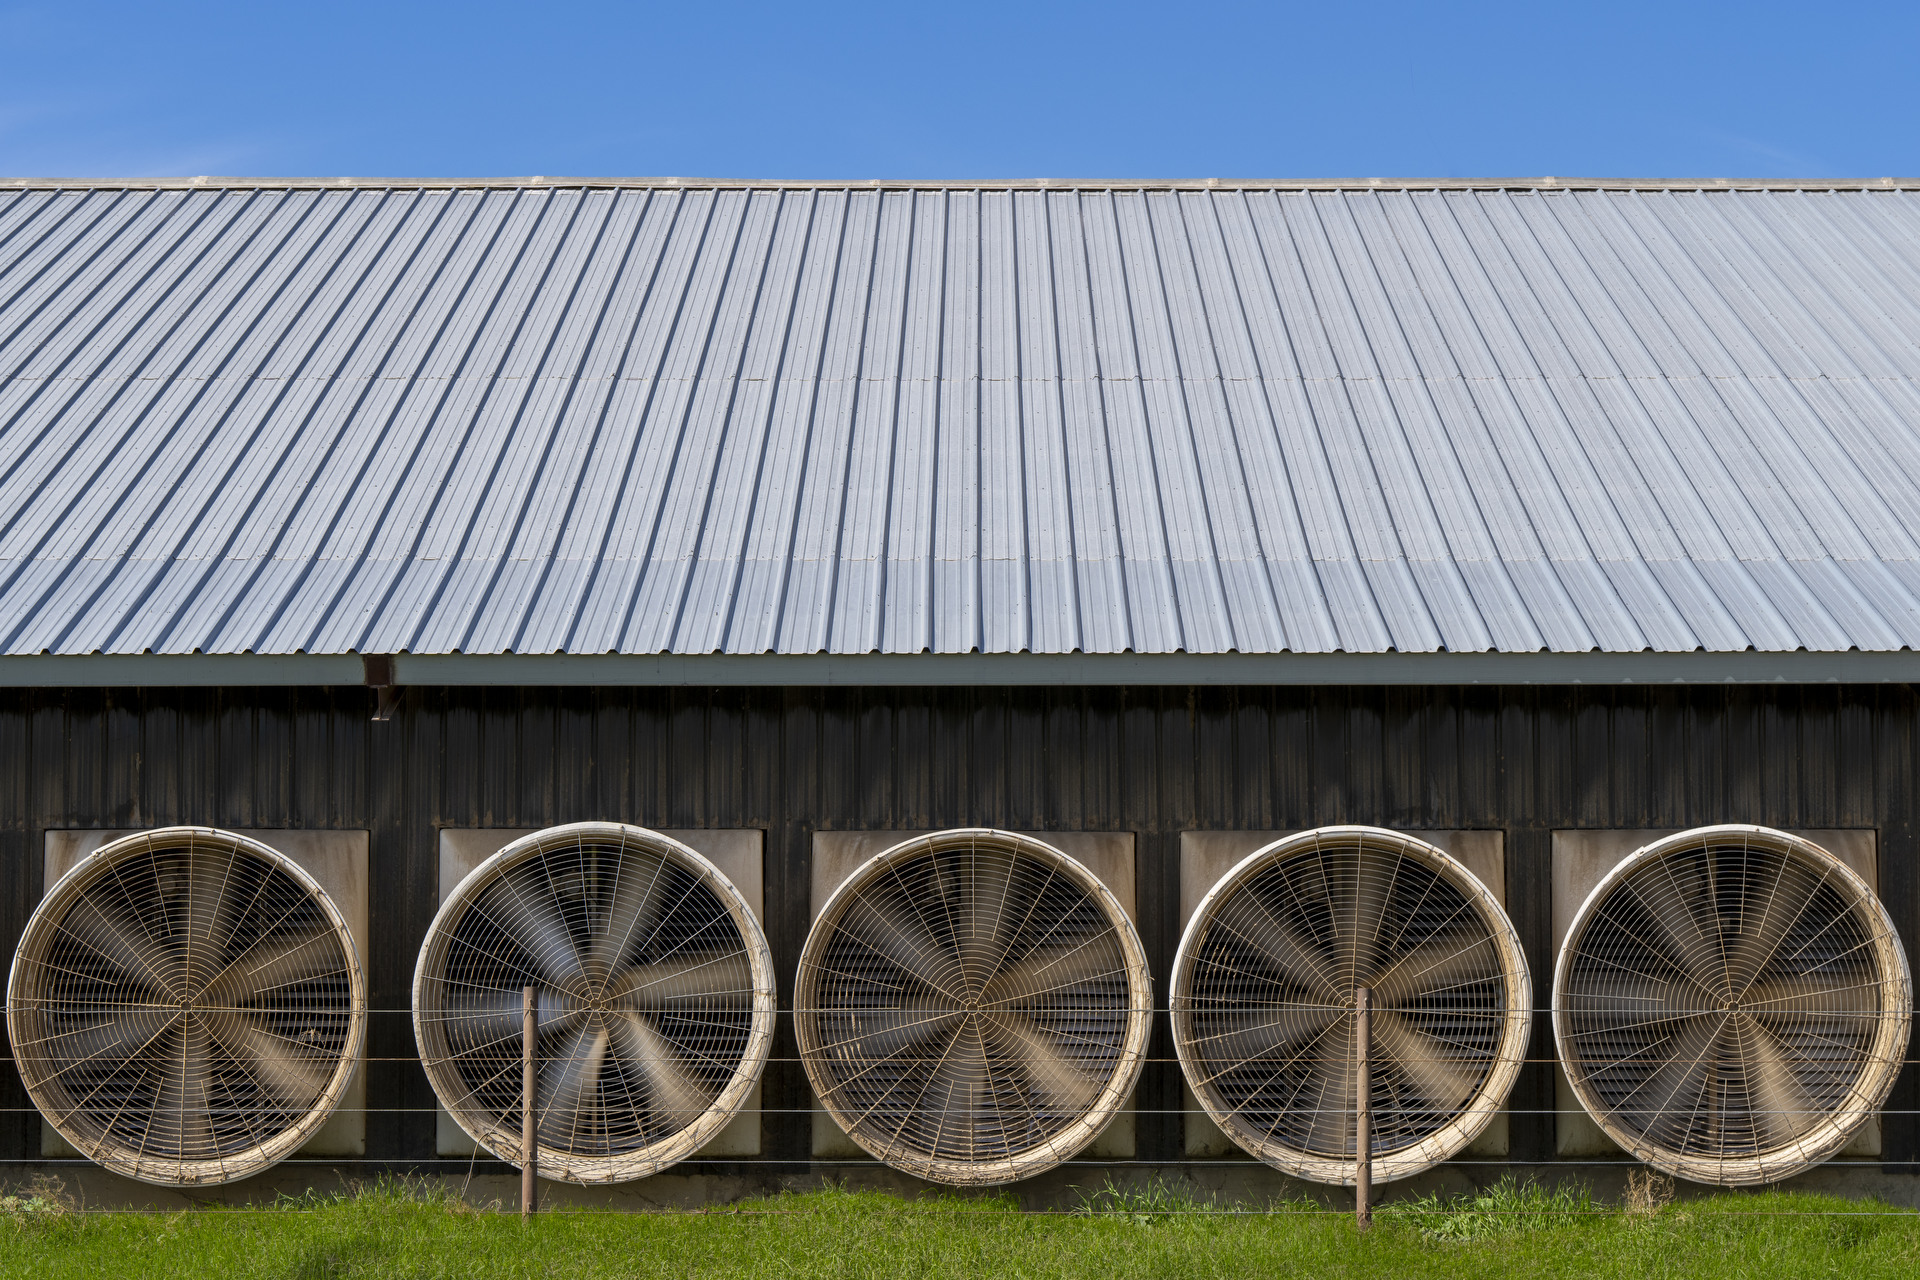 Fans from one of the cow barns at the Volleman’s Family Farm.